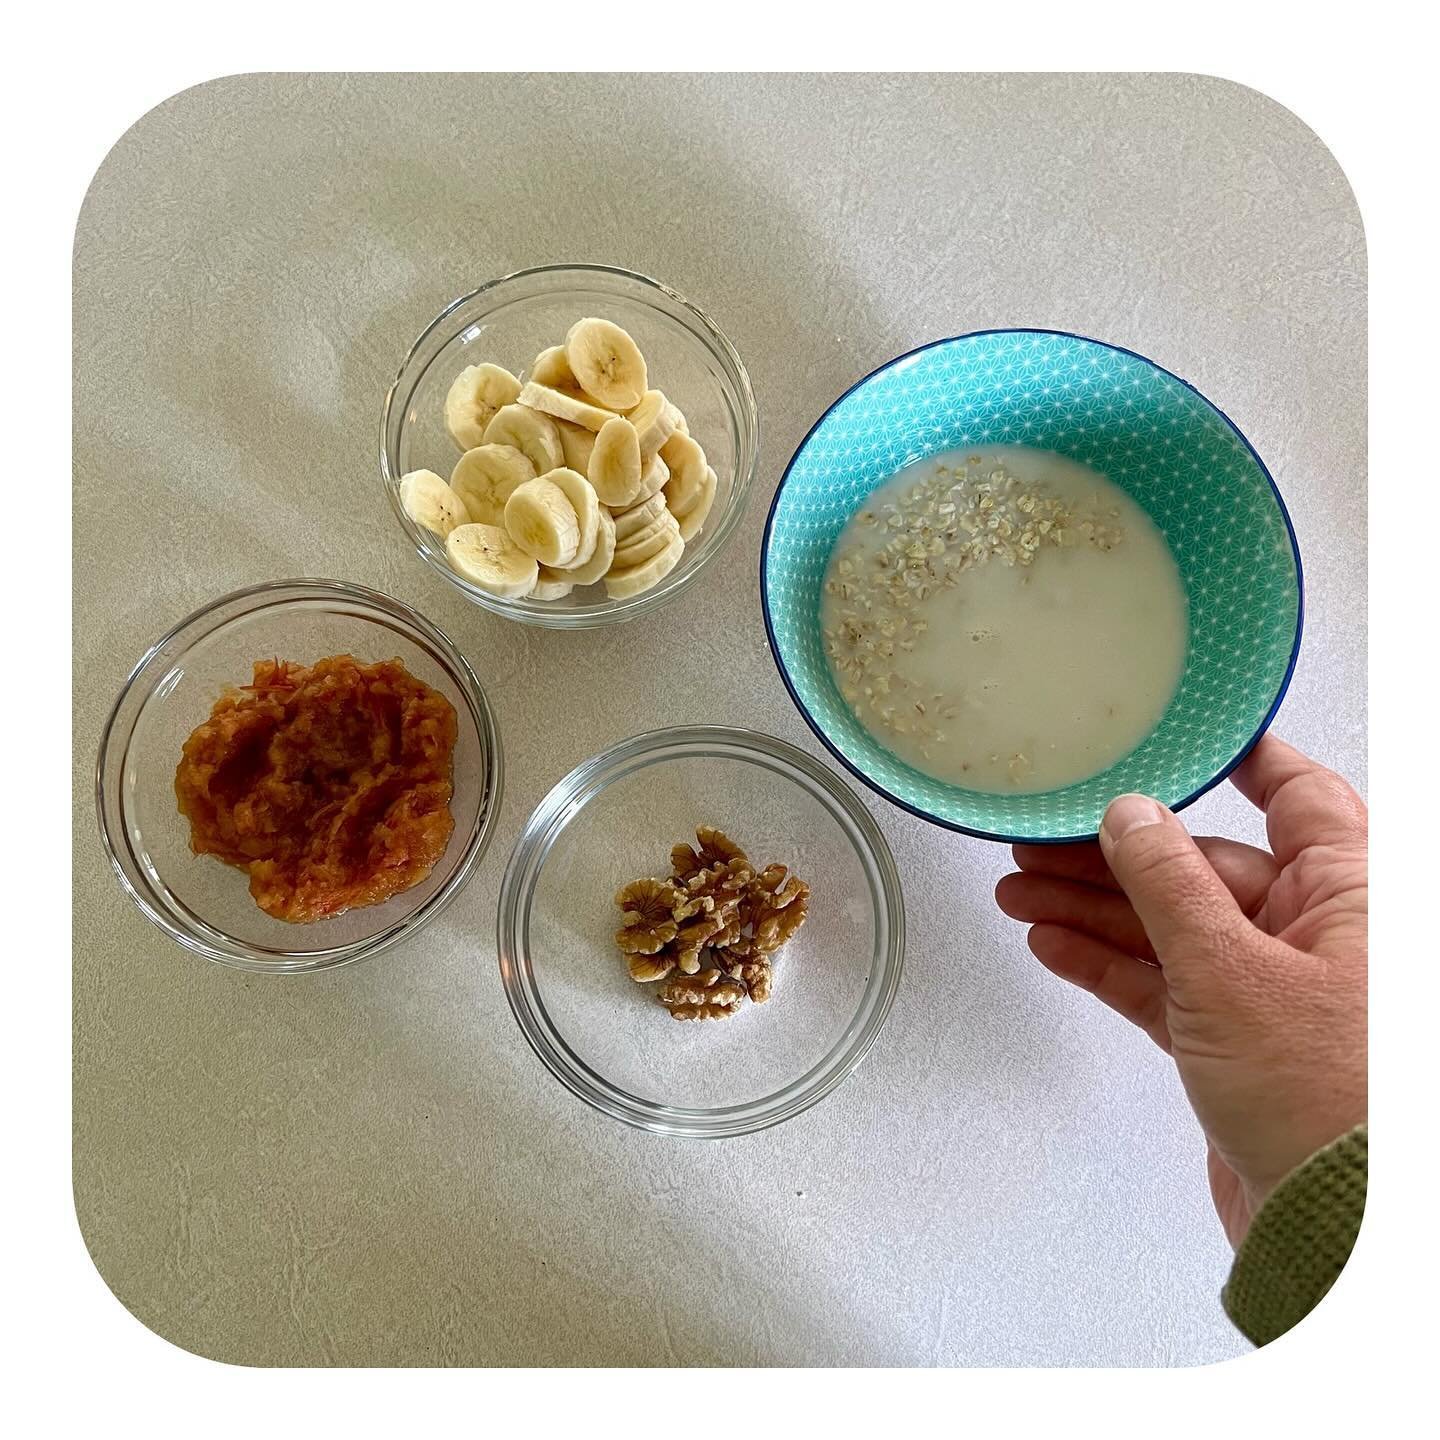 340 cals &bull; Breakfast oats:

1/4 cup quick oats
1/2 cup almond milk 
1/2 apple, grated
1 medium banana
14g walnuts
1 tsp peanut butter 
Sprinkled either cinnamon 

This morning I realized that I had none of the ingredients to either make my smoot